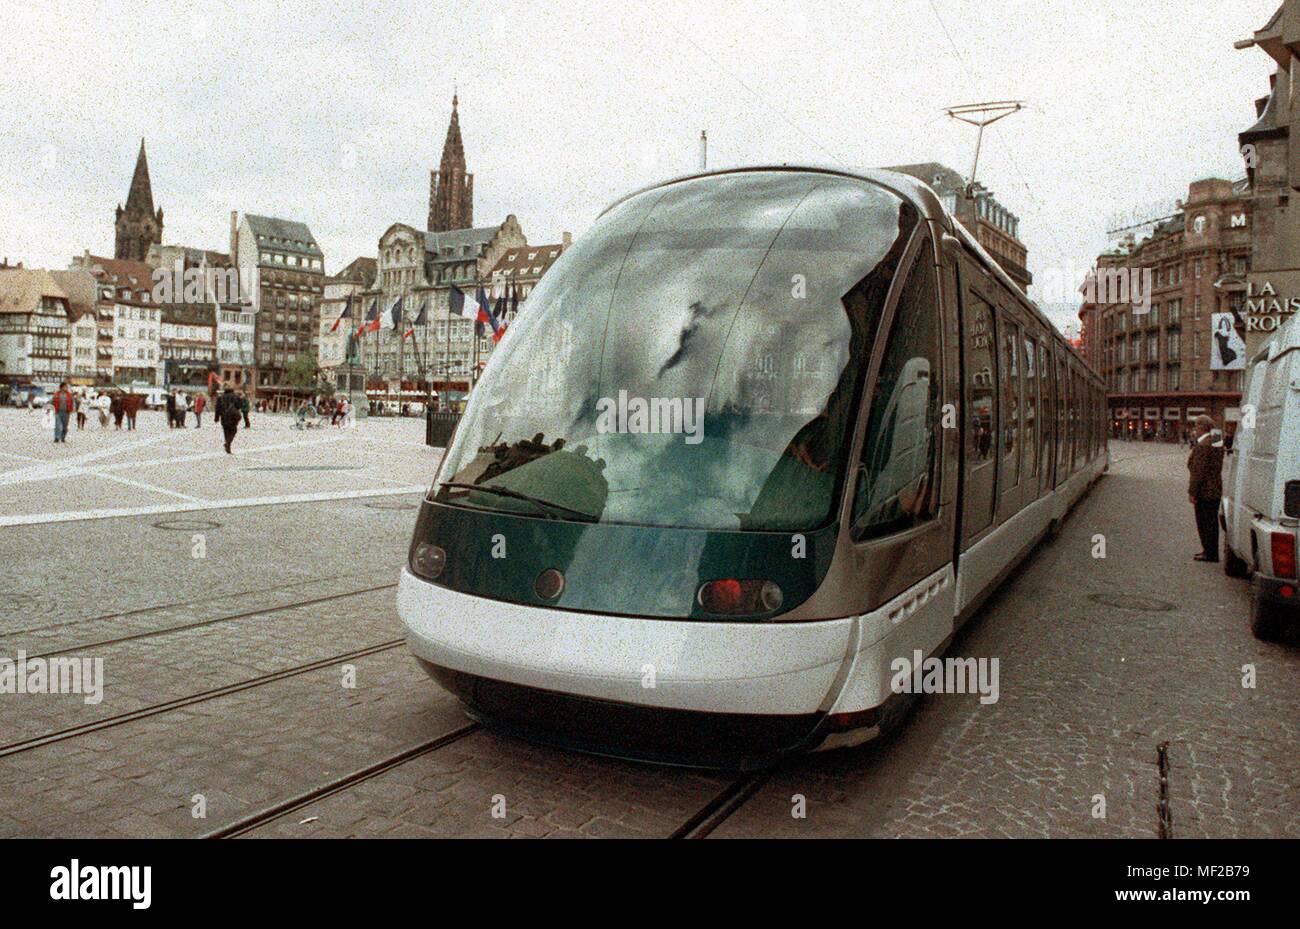 In a futuristic outfit glides on 26.10.1994 the new tram over the tracks at the 'Place Kleber' in the center of the Alsatian city Strasbourg. In the background the tower of the Strasbourg Munsters (M). The stromlinienformige railway, which was built in England, is inaugurated after test drives on 25.11.1994 solemnly. It connects 12.6 kilometers long the city center with the suburbs Illkirch-Graffenstaden and Hautepierre. | usage worldwide Stock Photo